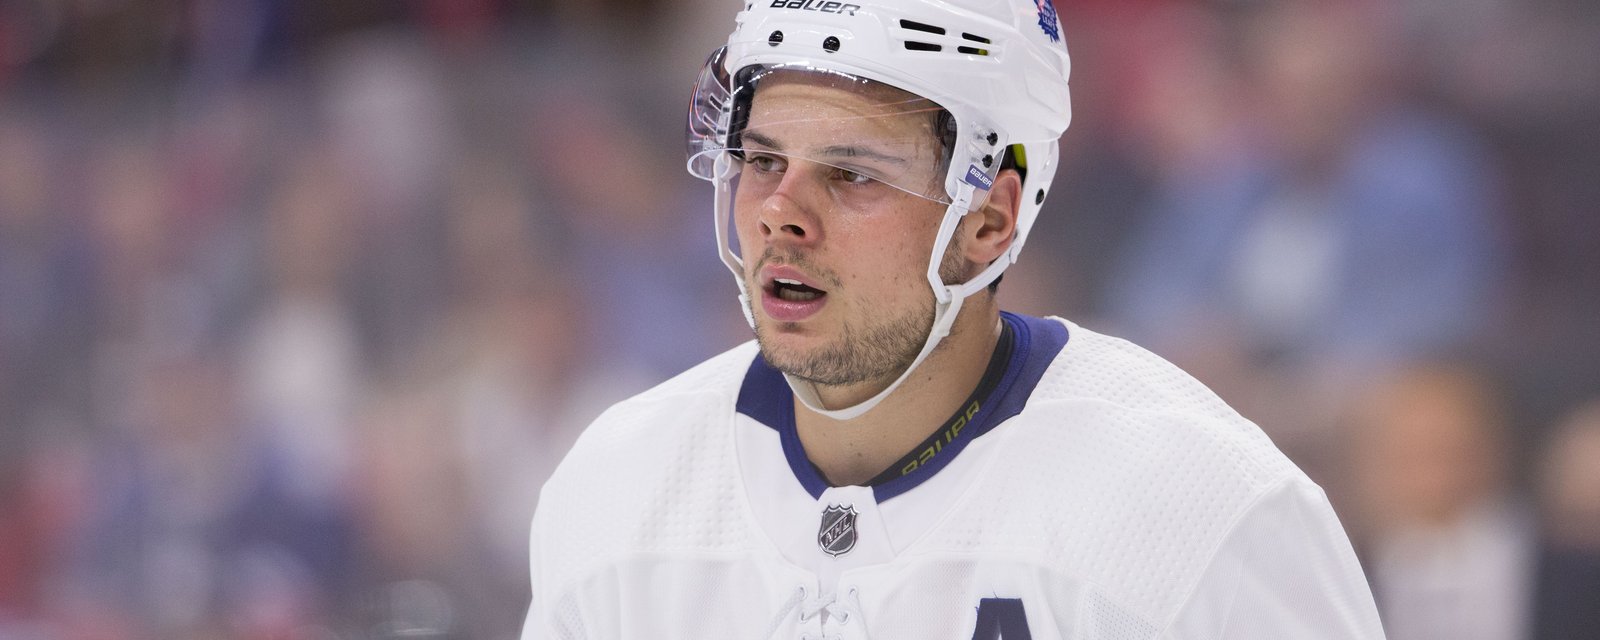 Insider rips Auston Matthews for looking “ordinary” and “uninspired” 